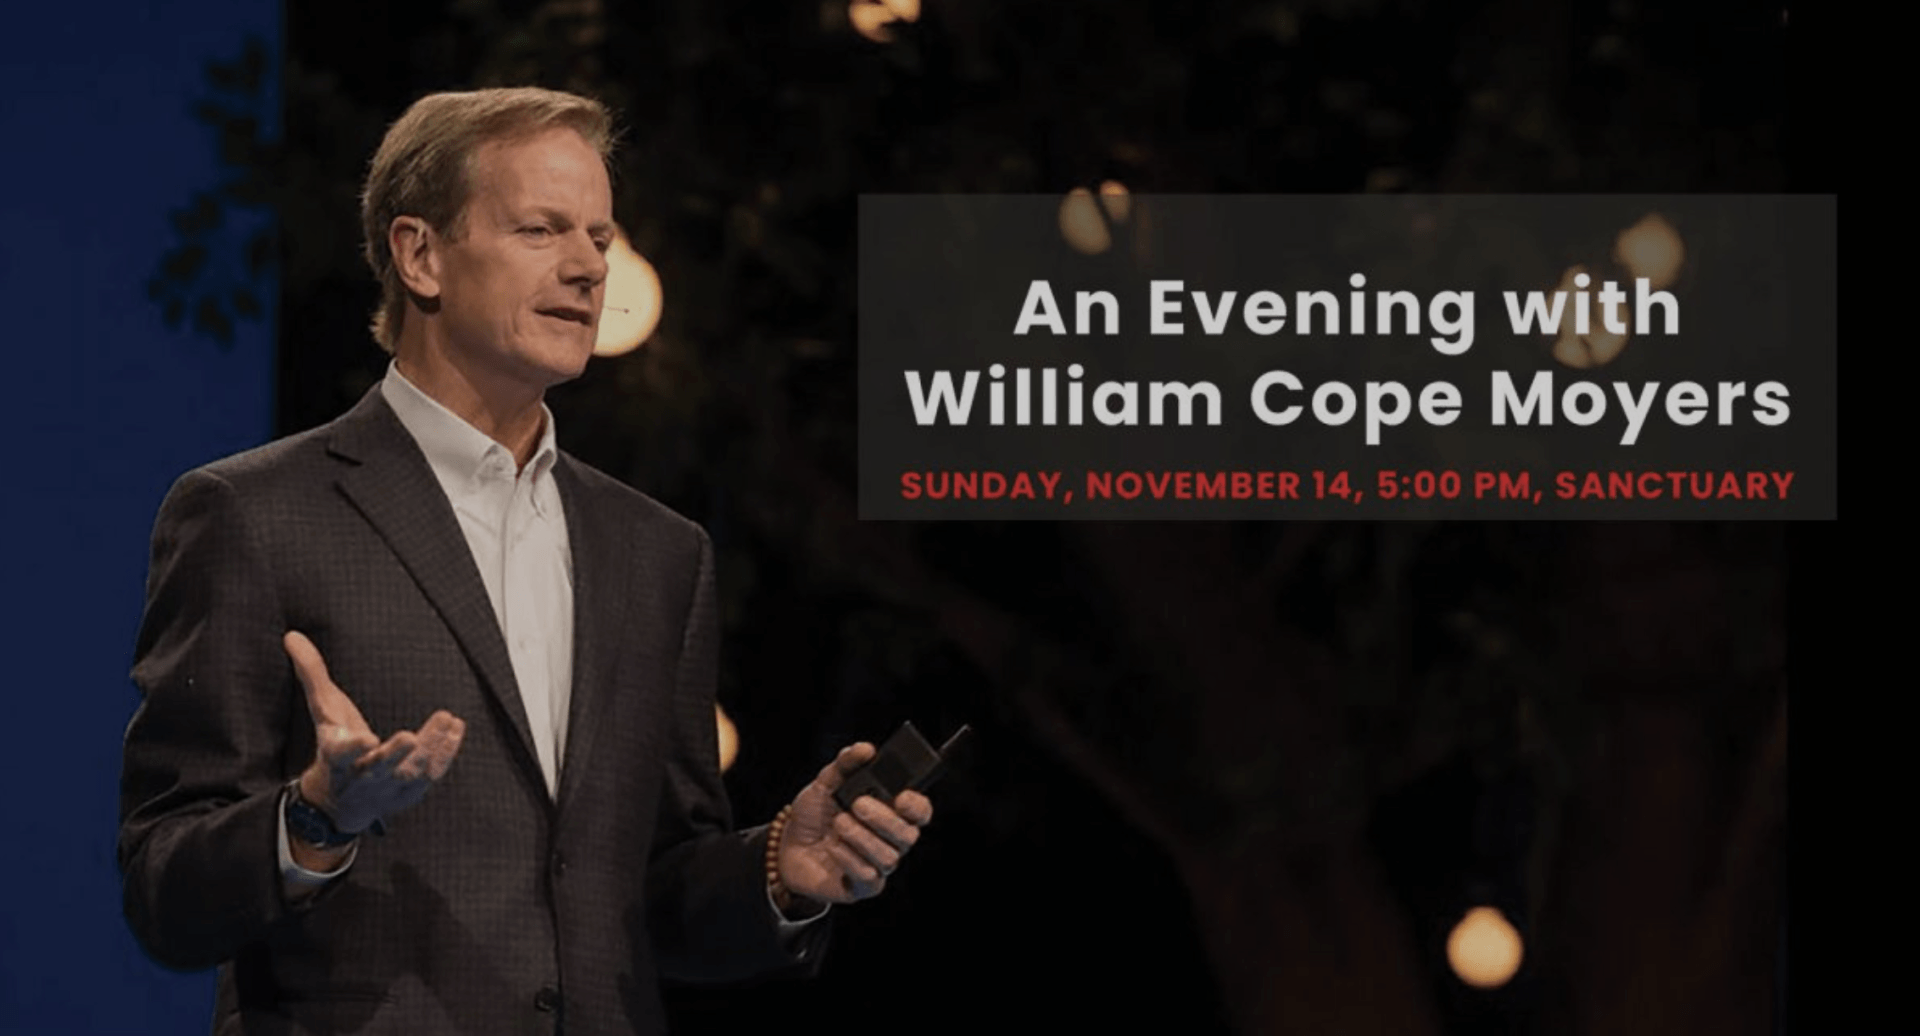 An Evening With William Cope Moyers